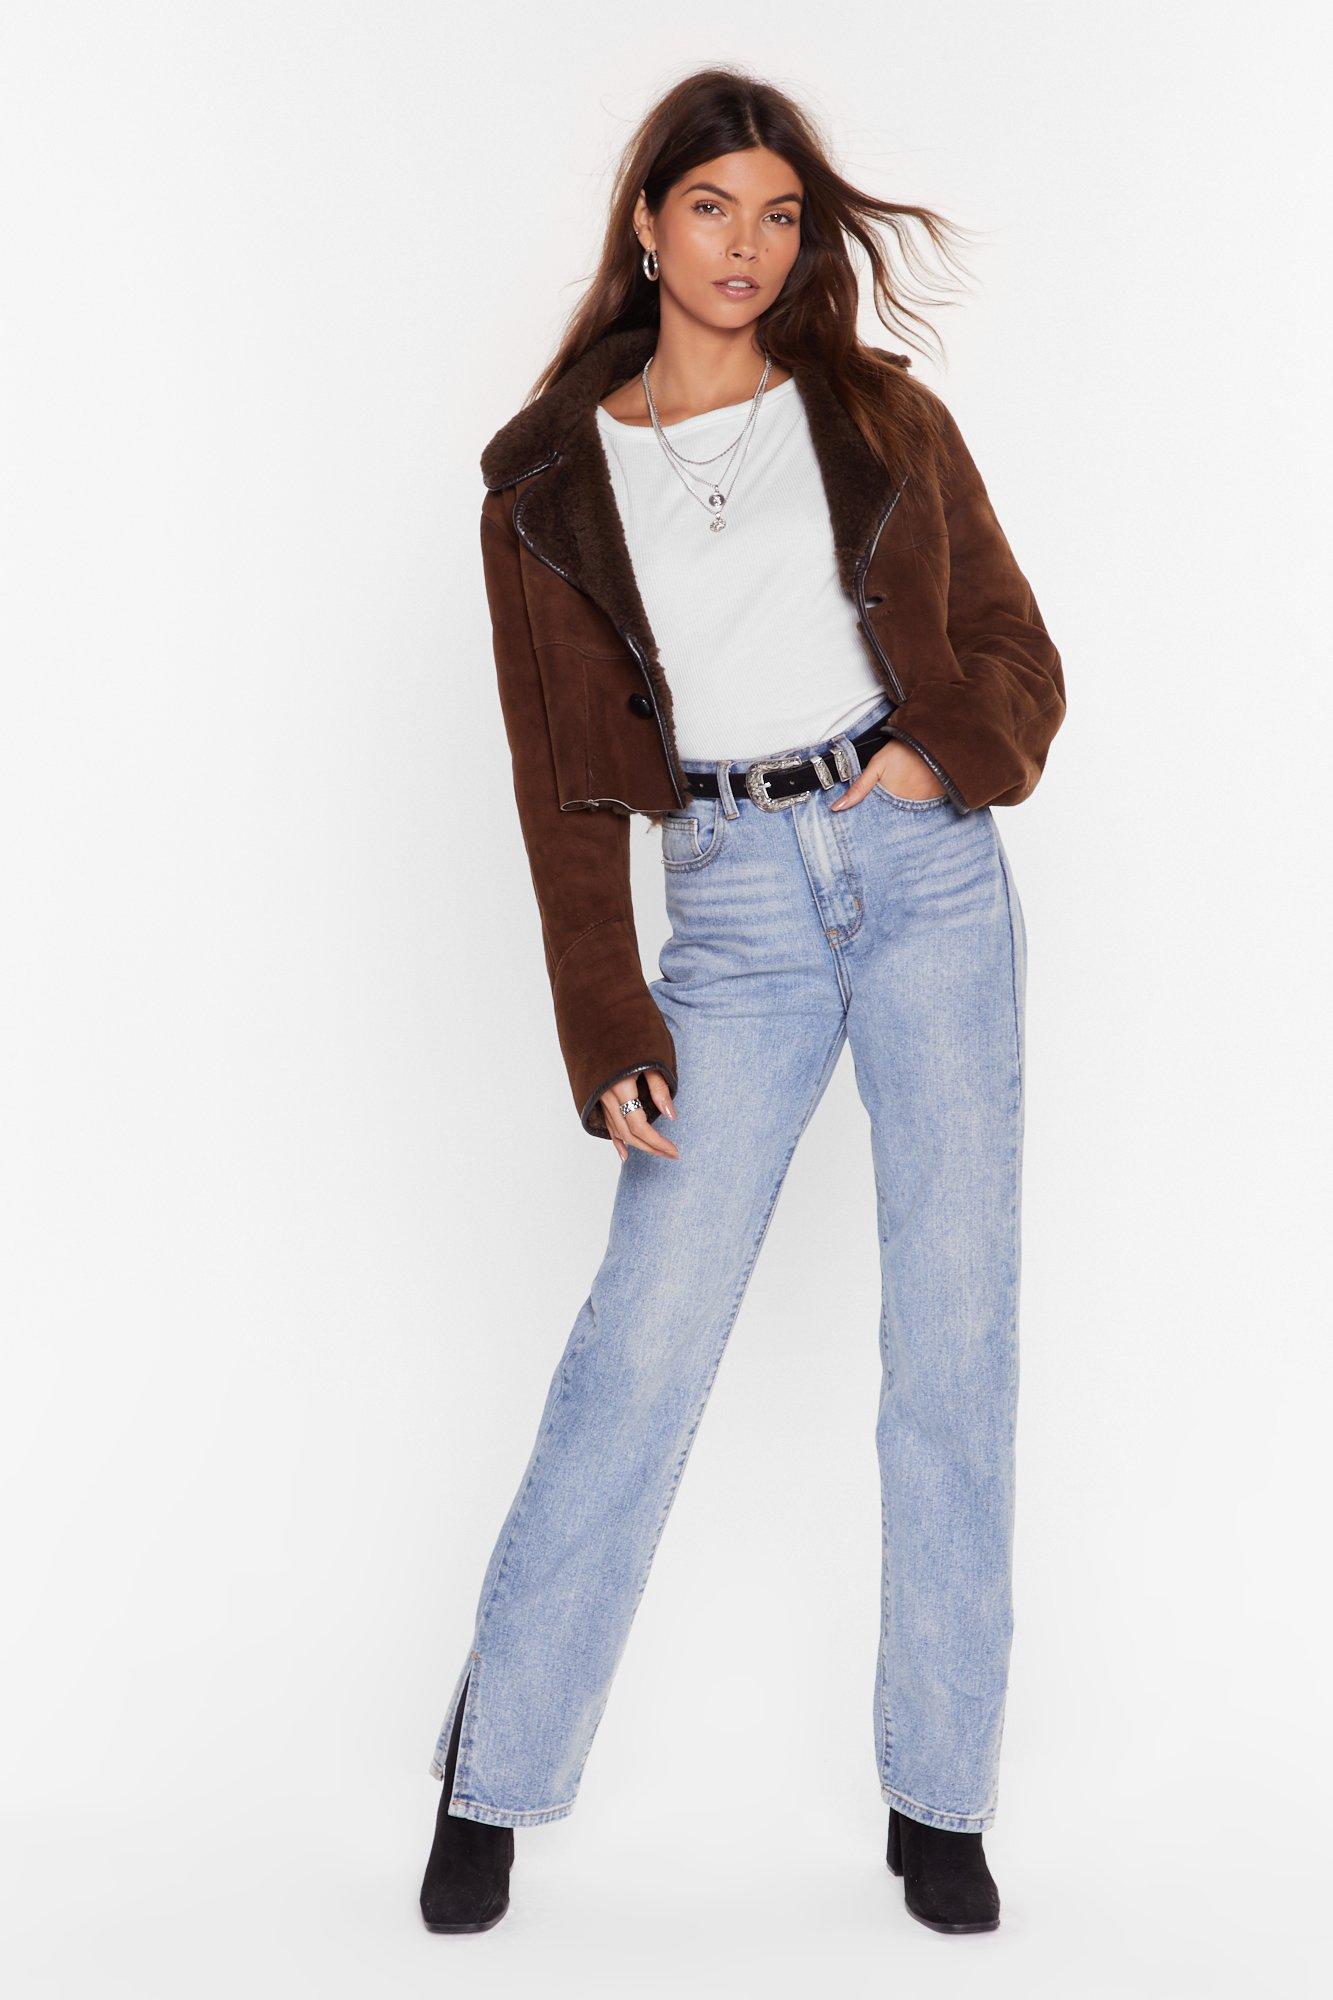 F/W 2015 Cropped Shearling Jacket, Authentic & Vintage